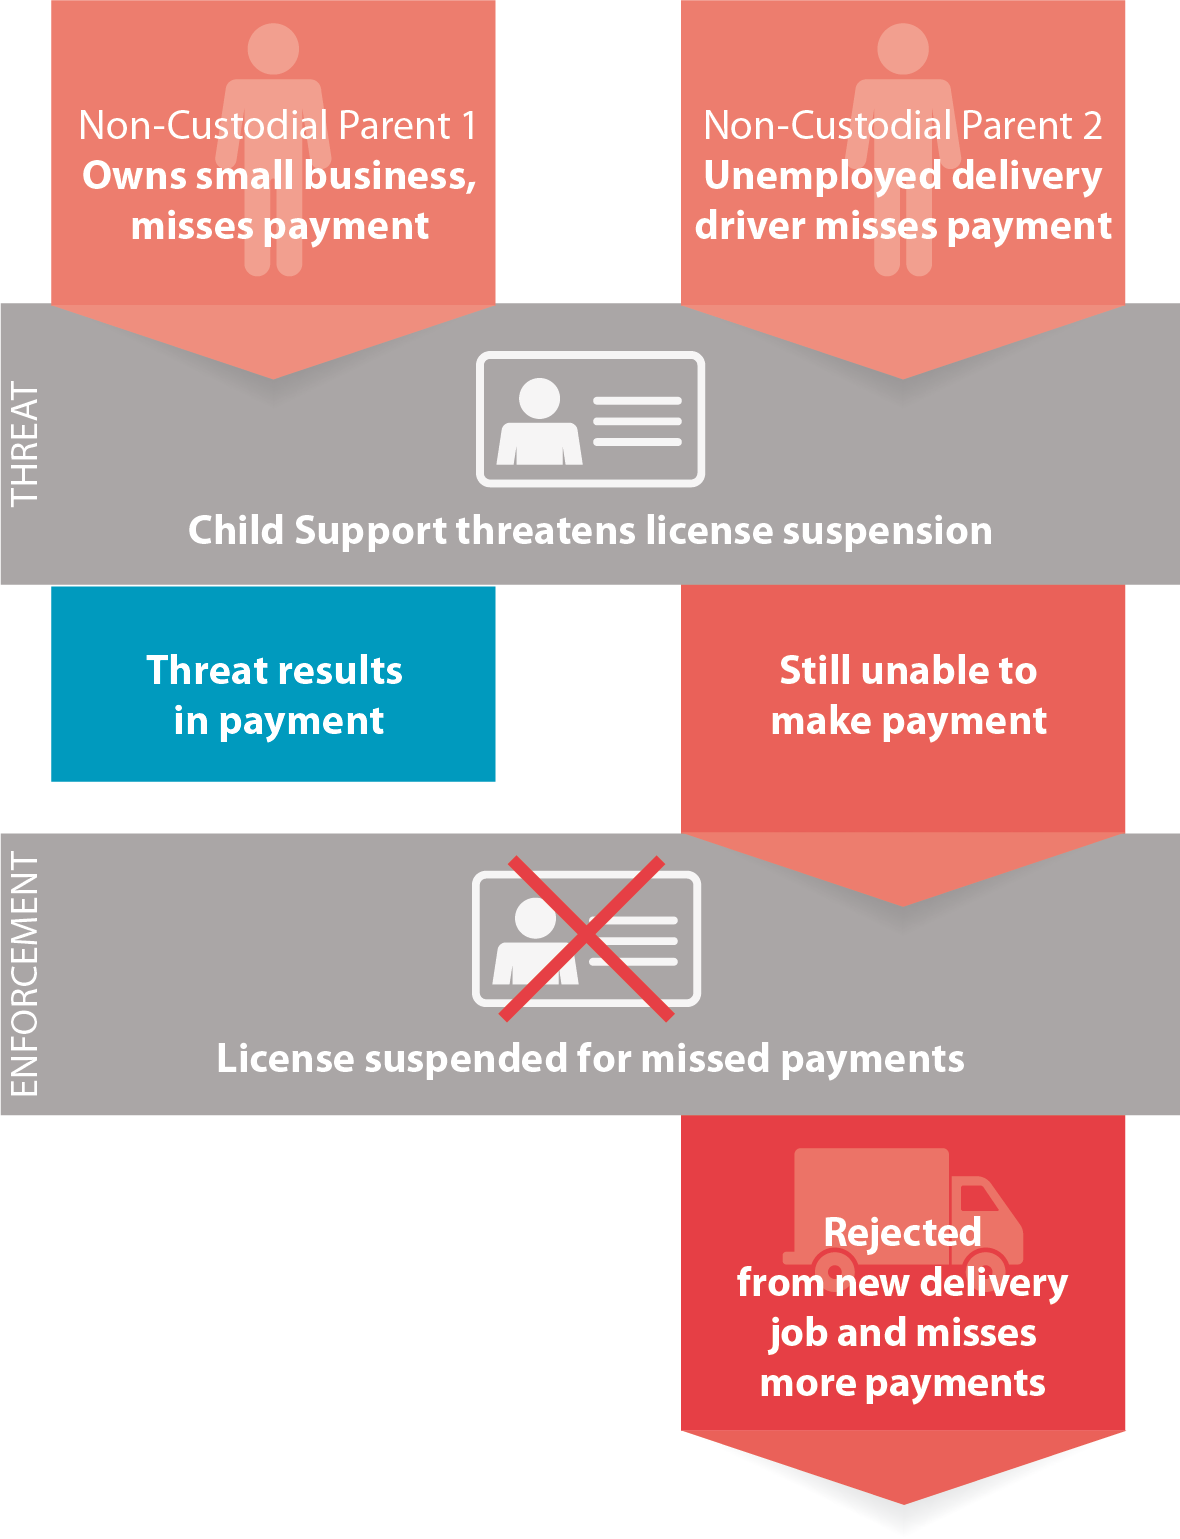 The graphic consists of two vertical bars overlaid with two gray, horizontal bars. The vertical bar on the left is labelled "Non-Custodial Parent 1: Owns small business, misses payment." An arrow leads down to the first gray, horizontal bar titled "Threat: Child Support threatens license suspension" with an icon of a driver’s license. This "Threat results in payment." The second vertical bar on the right of the graphic is "Non-Custodial Parent 2: Unemployed delivery driver misses payment." An arrow leads down to the same gray, horizontal bar titled "Threat: Child Support threatens license suspension." The bar continues underneath this bar, and the parent is "Still unable to make payment." An arrow leads down from this section of the vertical bar to a second, gray horizontal bar titled "Enforcement: License suspended for missed payments" with an icon of a crossed-out driver’s license. The parent is then "Rejected from new delivery job and misses more payments."